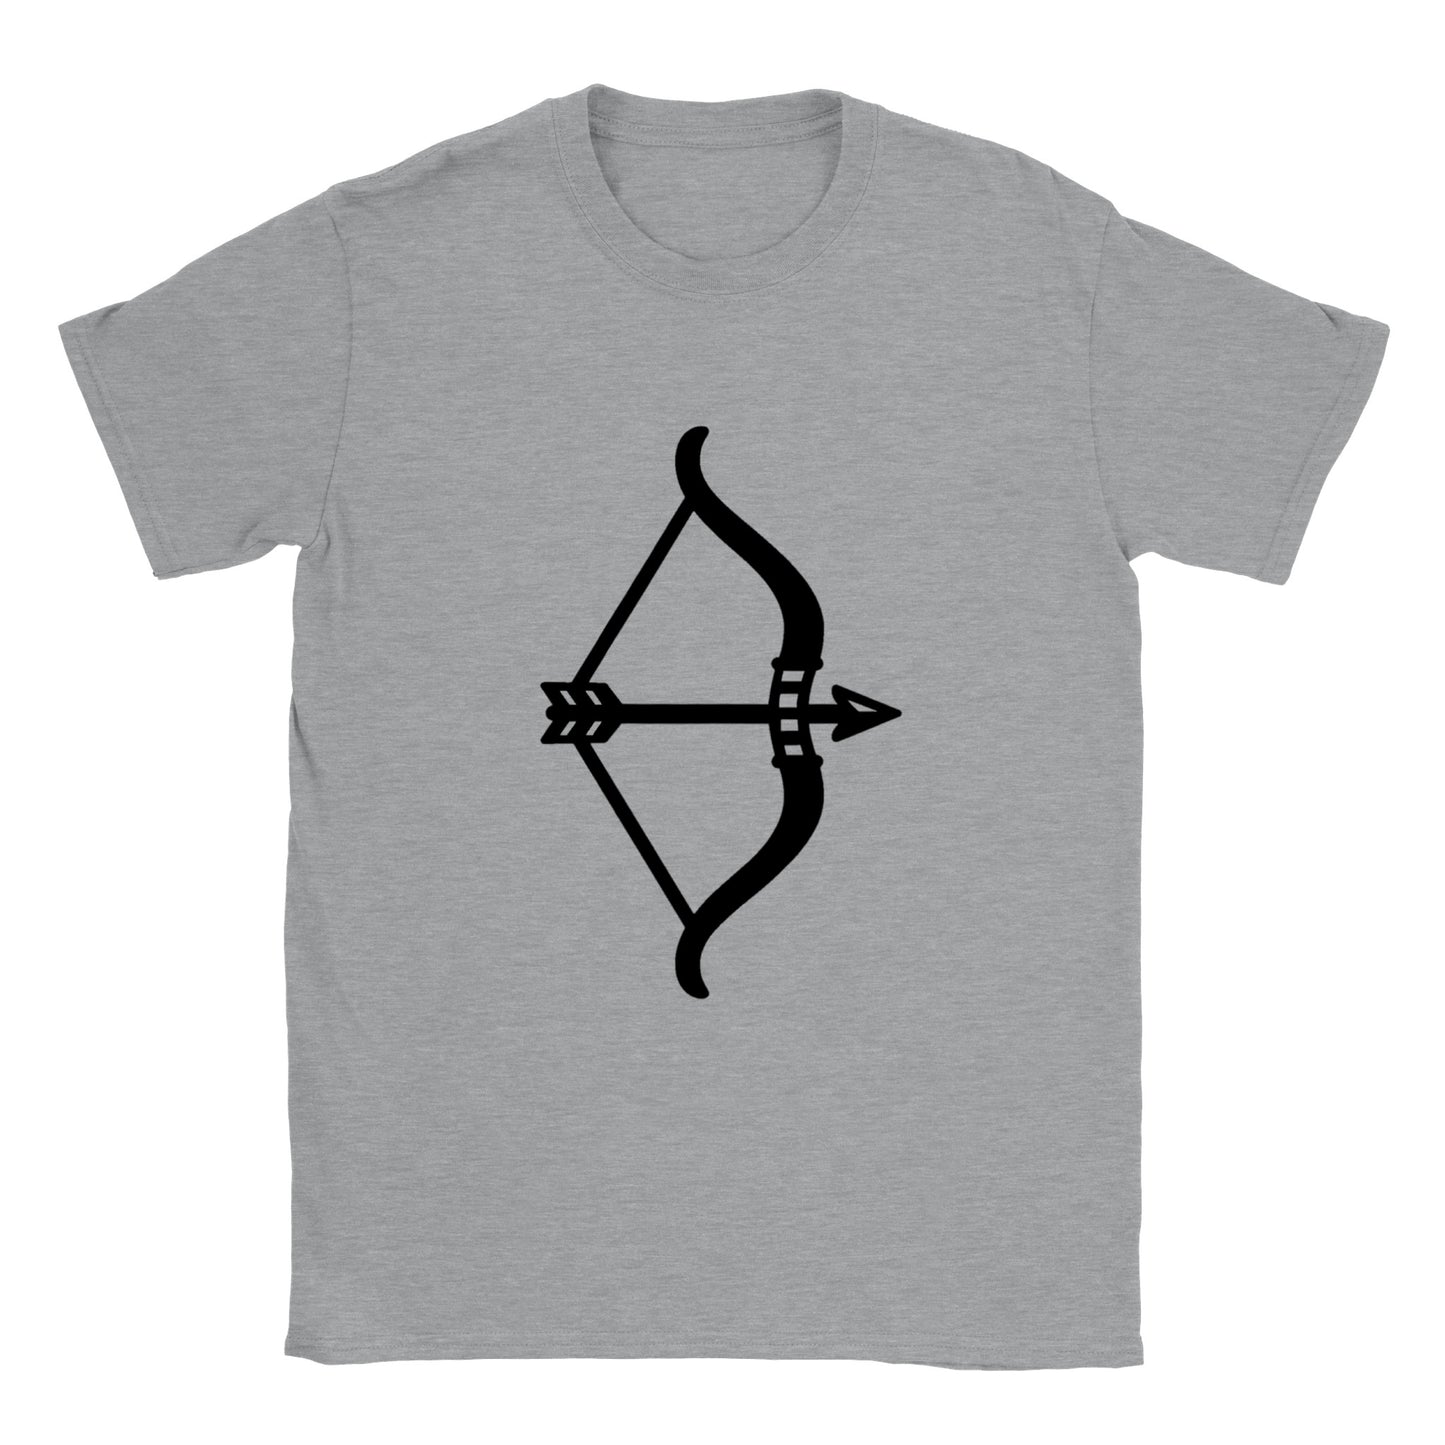 Bow and Arrow Couples T-shirt (His)